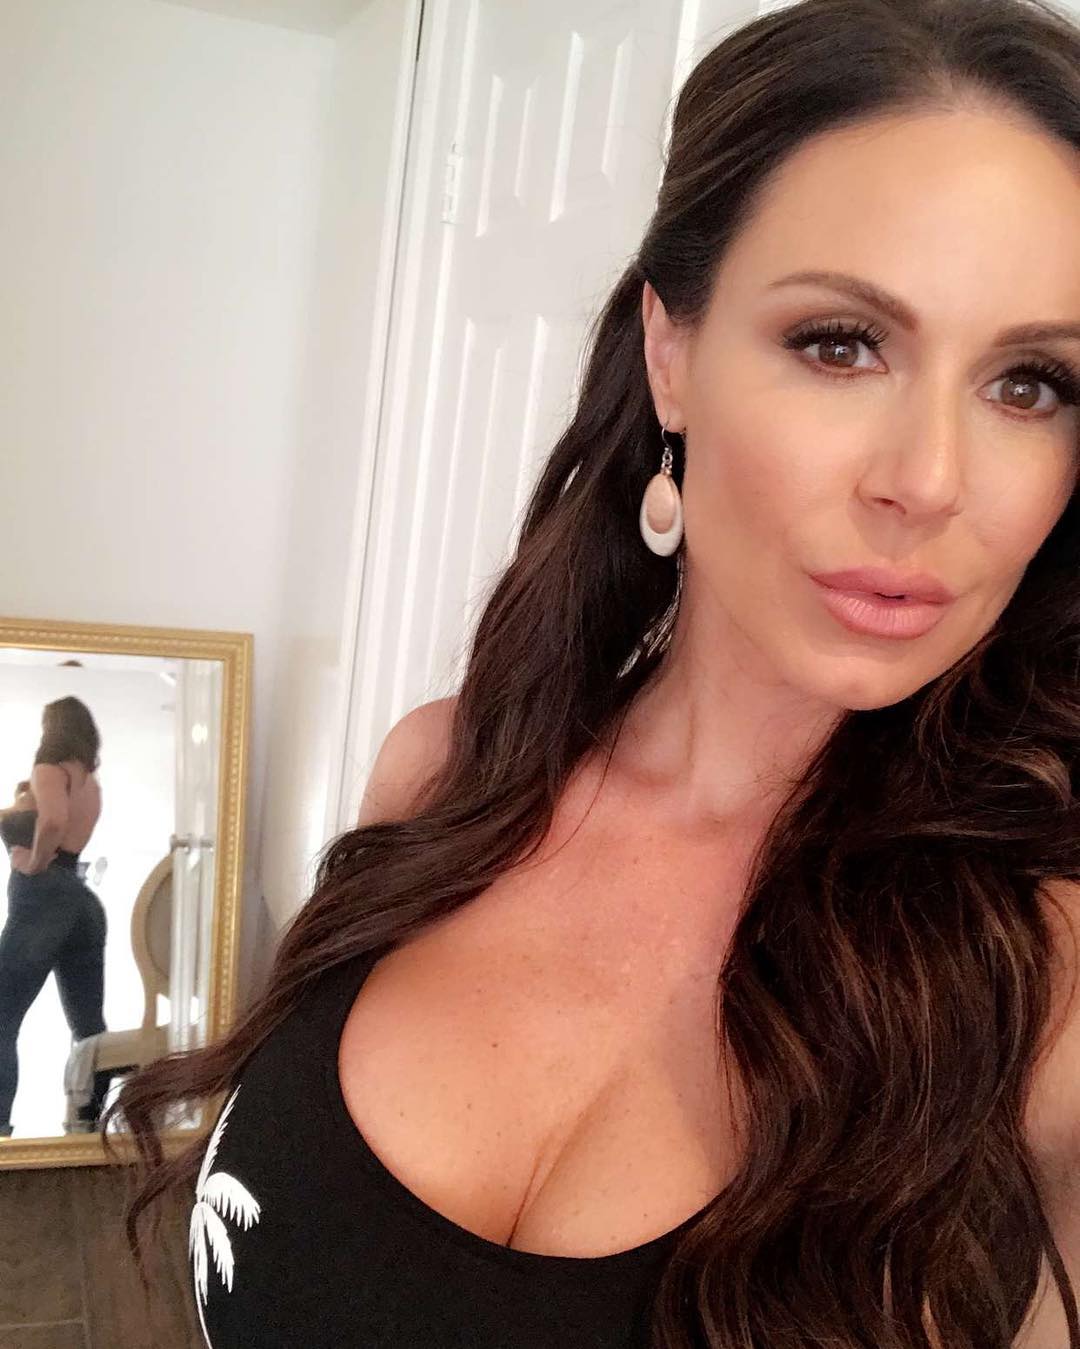 Kendra lust only fans video